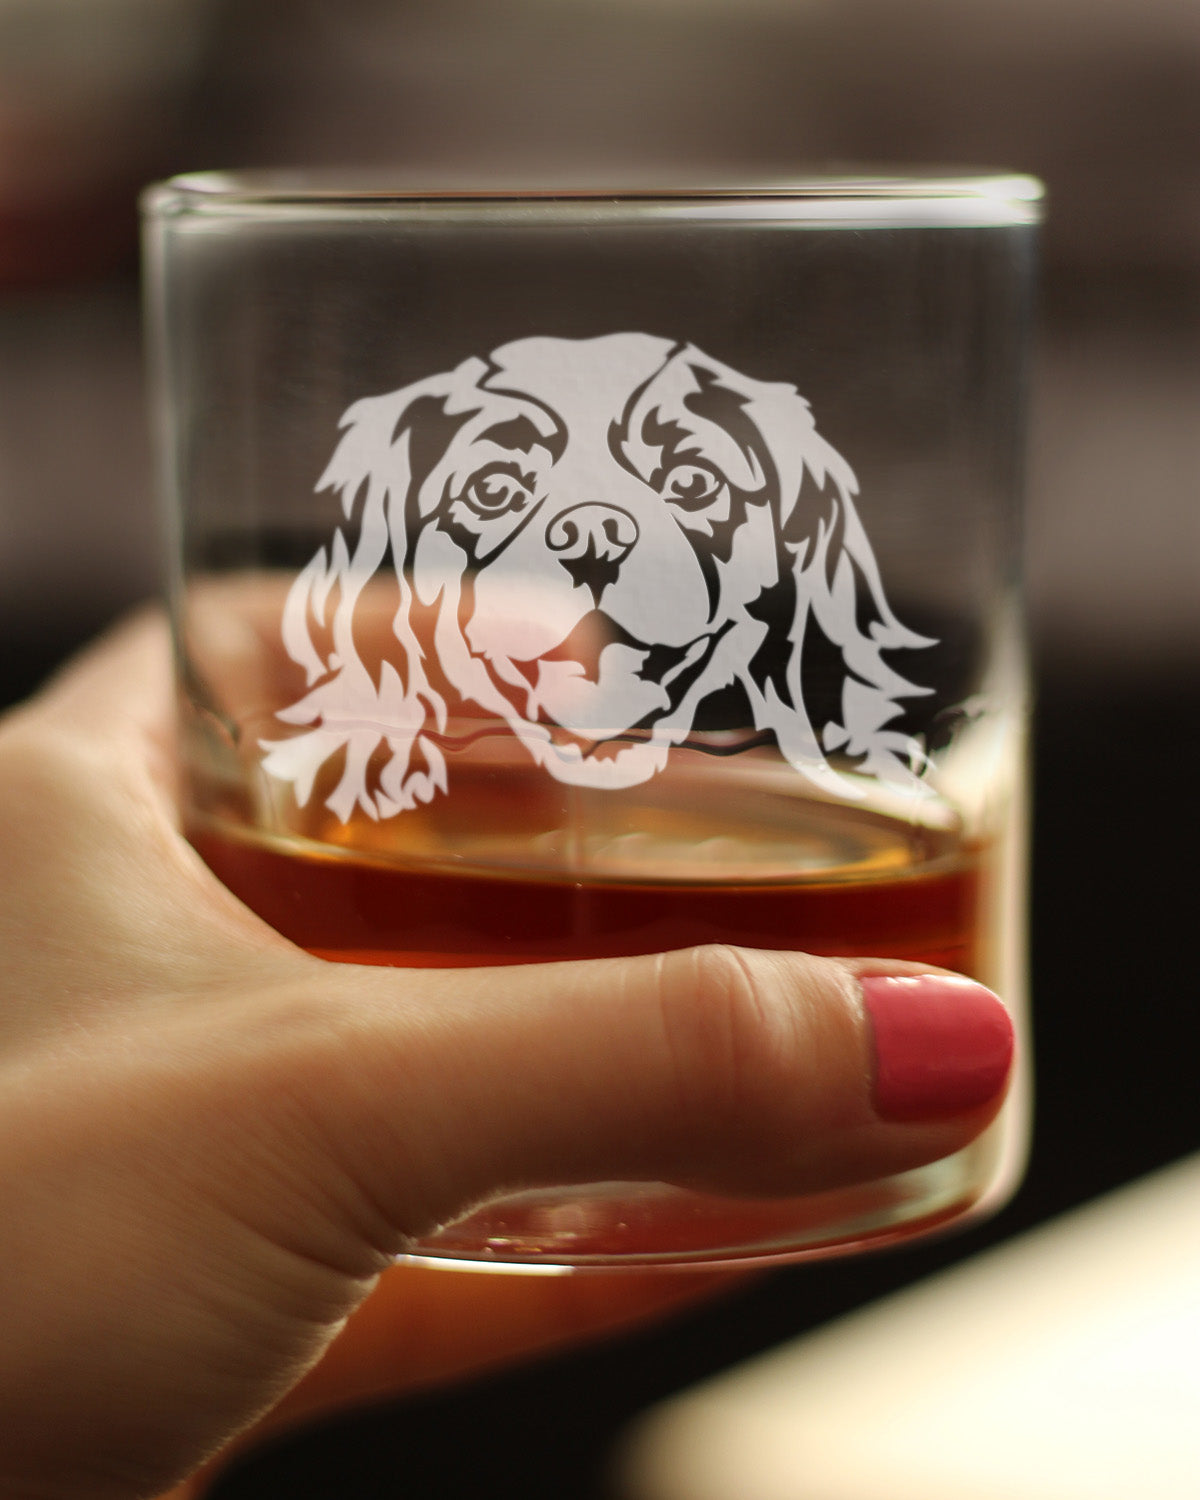 Cavalier King Charles Spaniel Face Whiskey Rocks Glass - Unique Dog Themed Decor and Gifts for Moms &amp; Dads of Cavaliers - 10.25 Oz